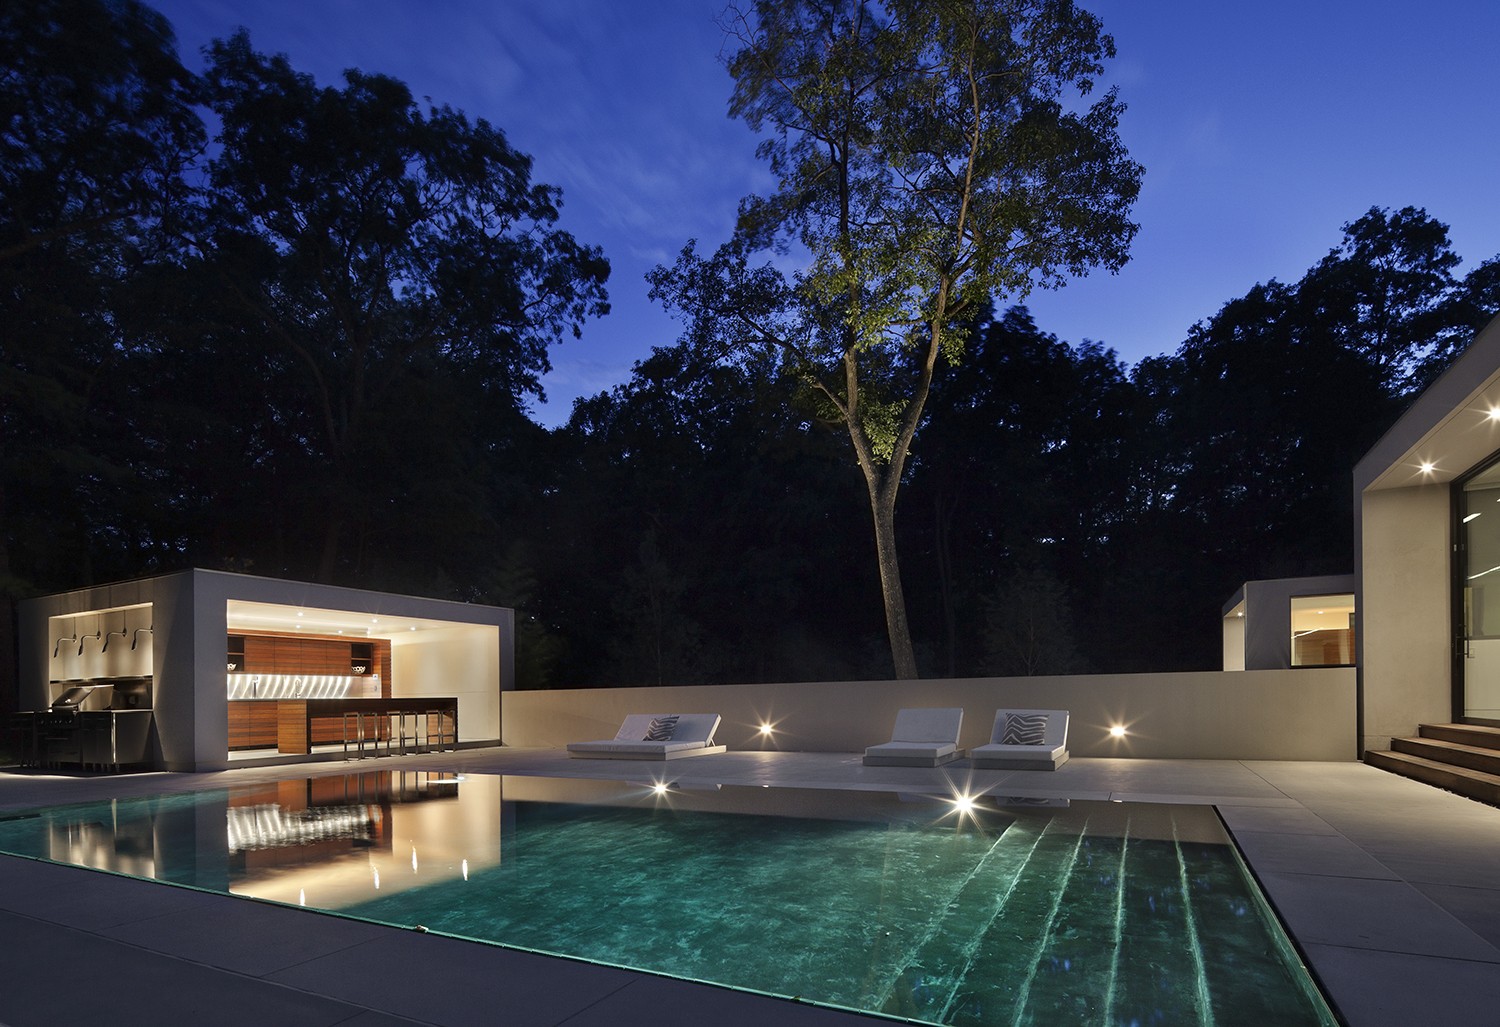 Ampersand Architecture: New Canaan House